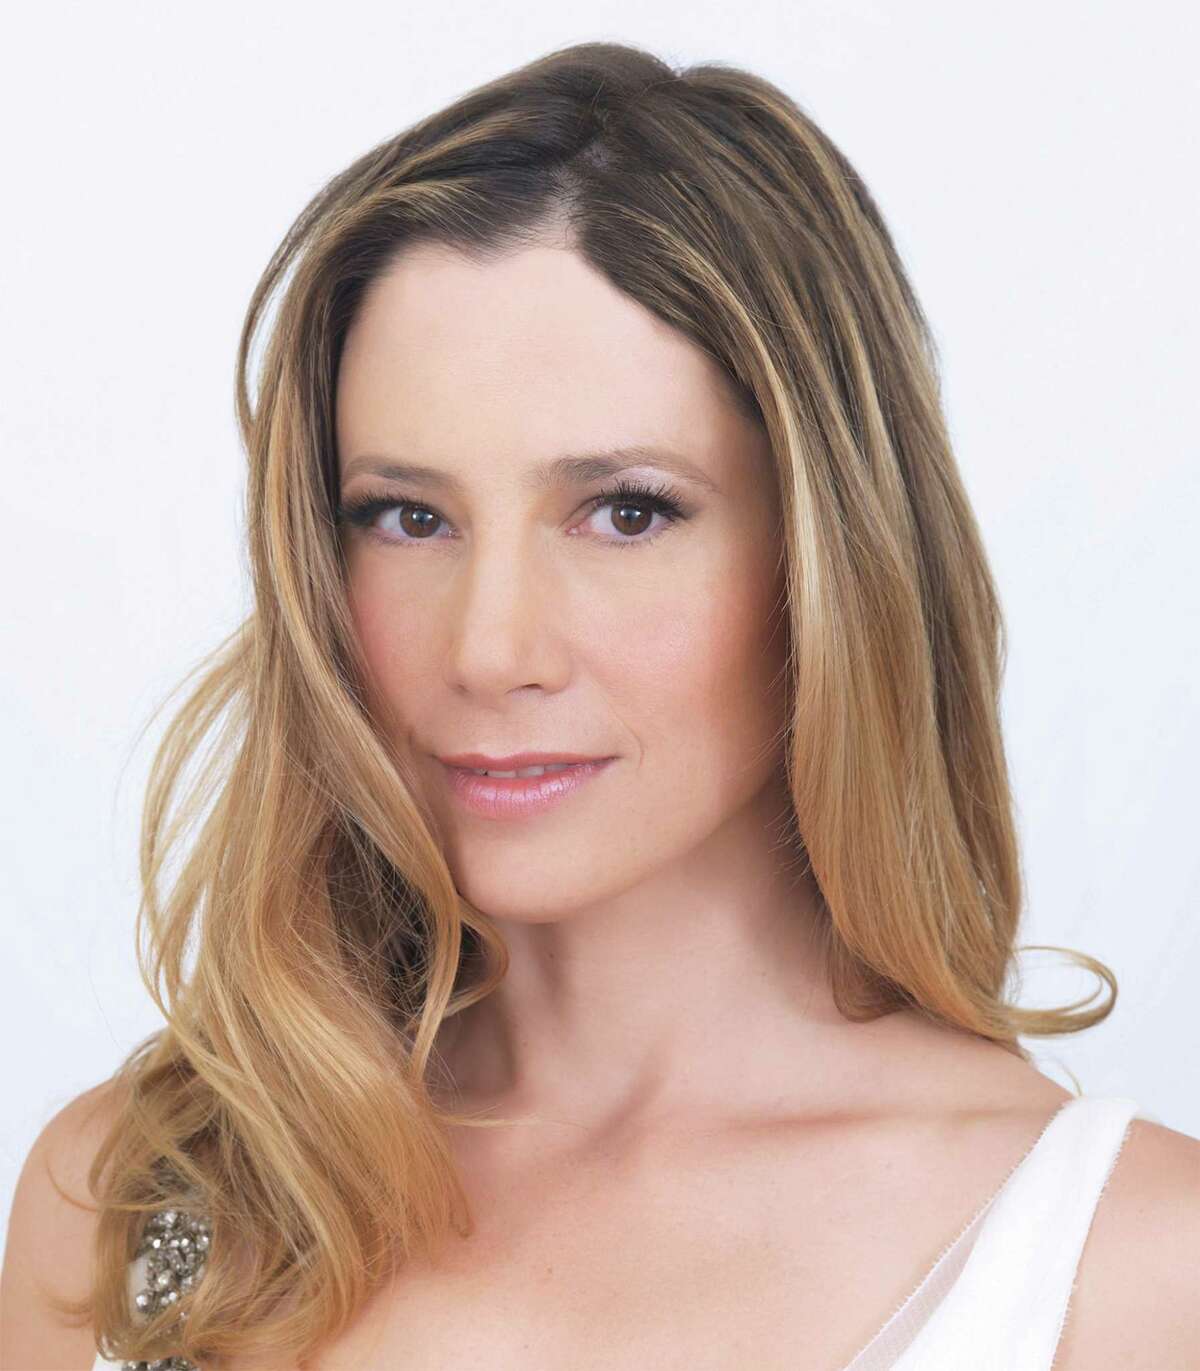 Award-winning actress and human rights advocate Mira Sorvino will serve as the replacement featured guest speaker at the 9th annual âTea on the Lawnâ set for April 28, 2017 to benefit New Danville.